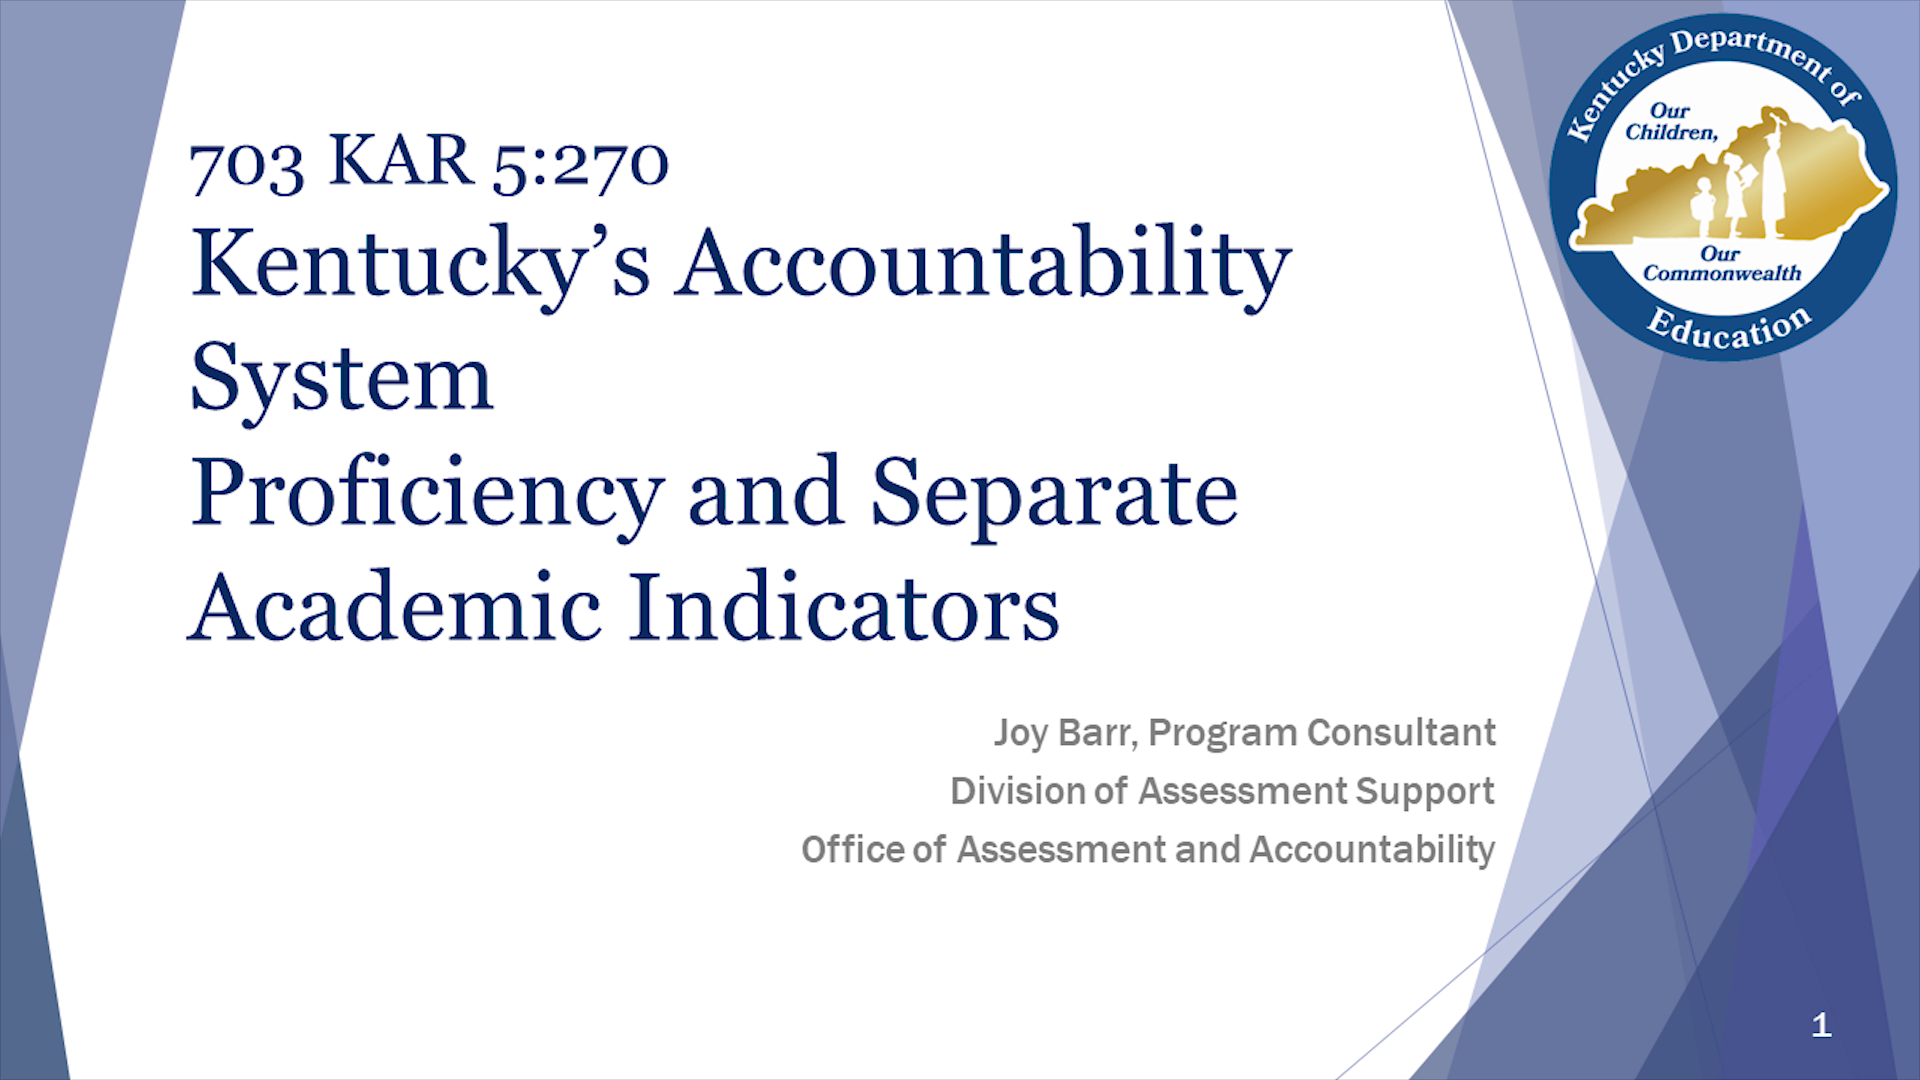 Kentucky's Accountability System Proficiency and Separate Academic Indicators